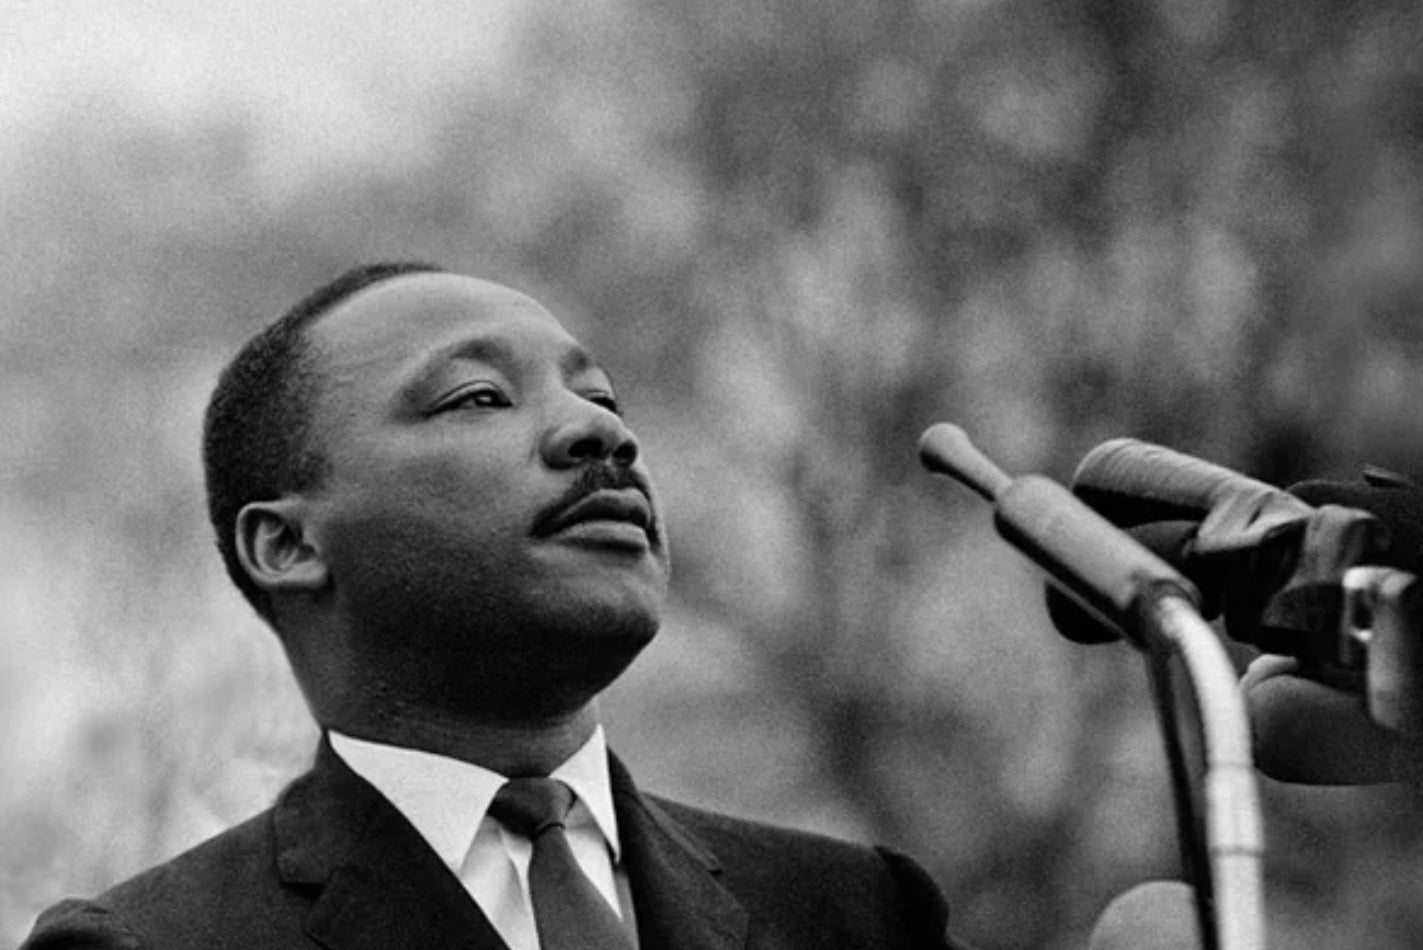 Rare Letter Signed By Dr. Martin Luther King Jr. Being Sold For $95K Online